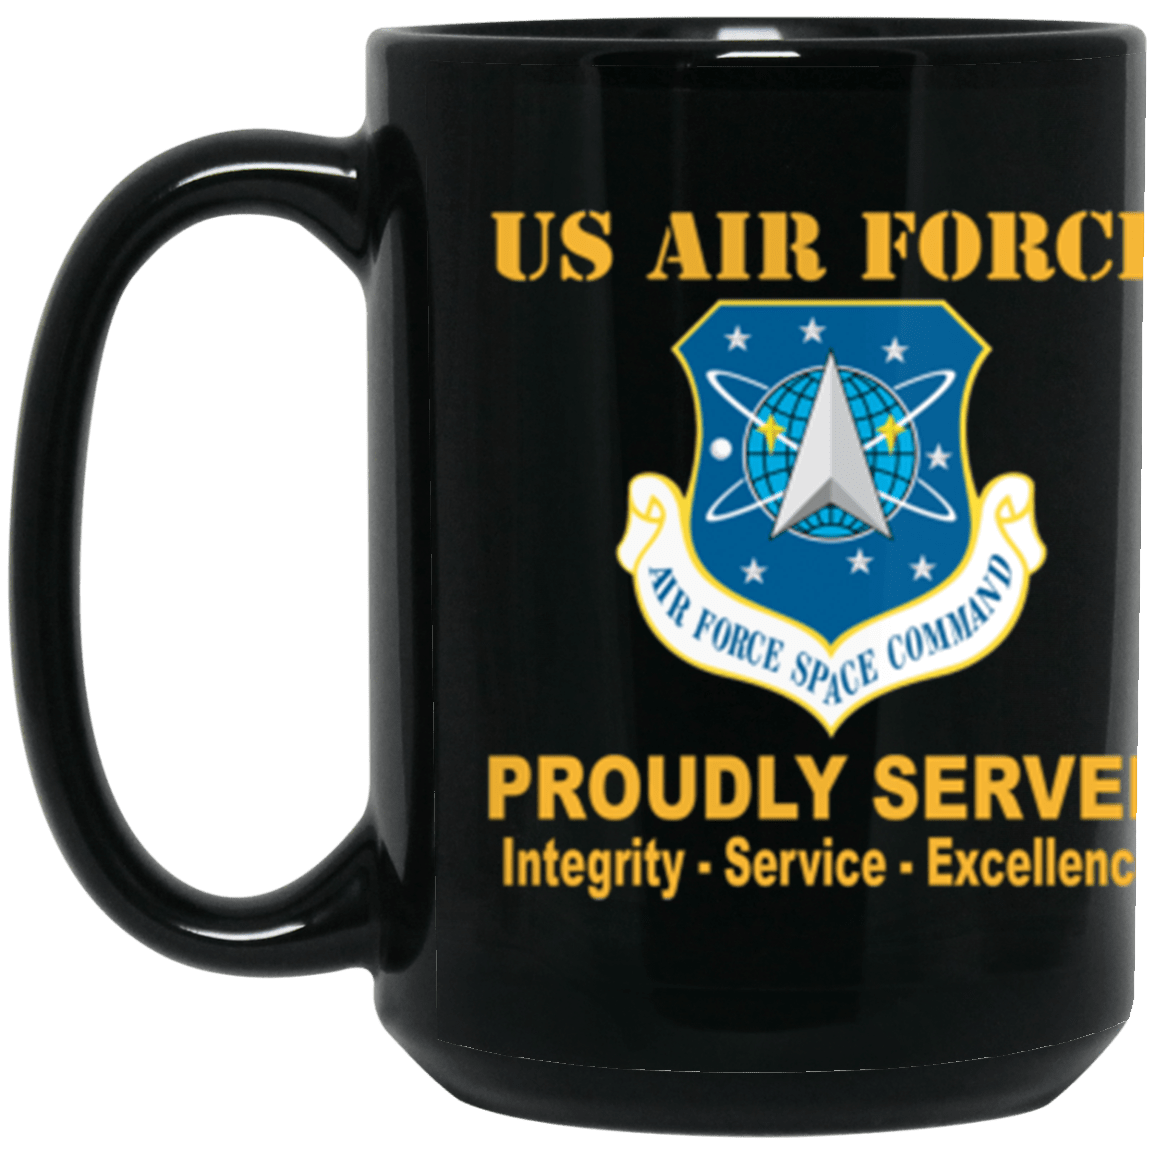 US Air Force Space Command Proudly Served Core Values 15 oz. Black Mug-Drinkware-Veterans Nation